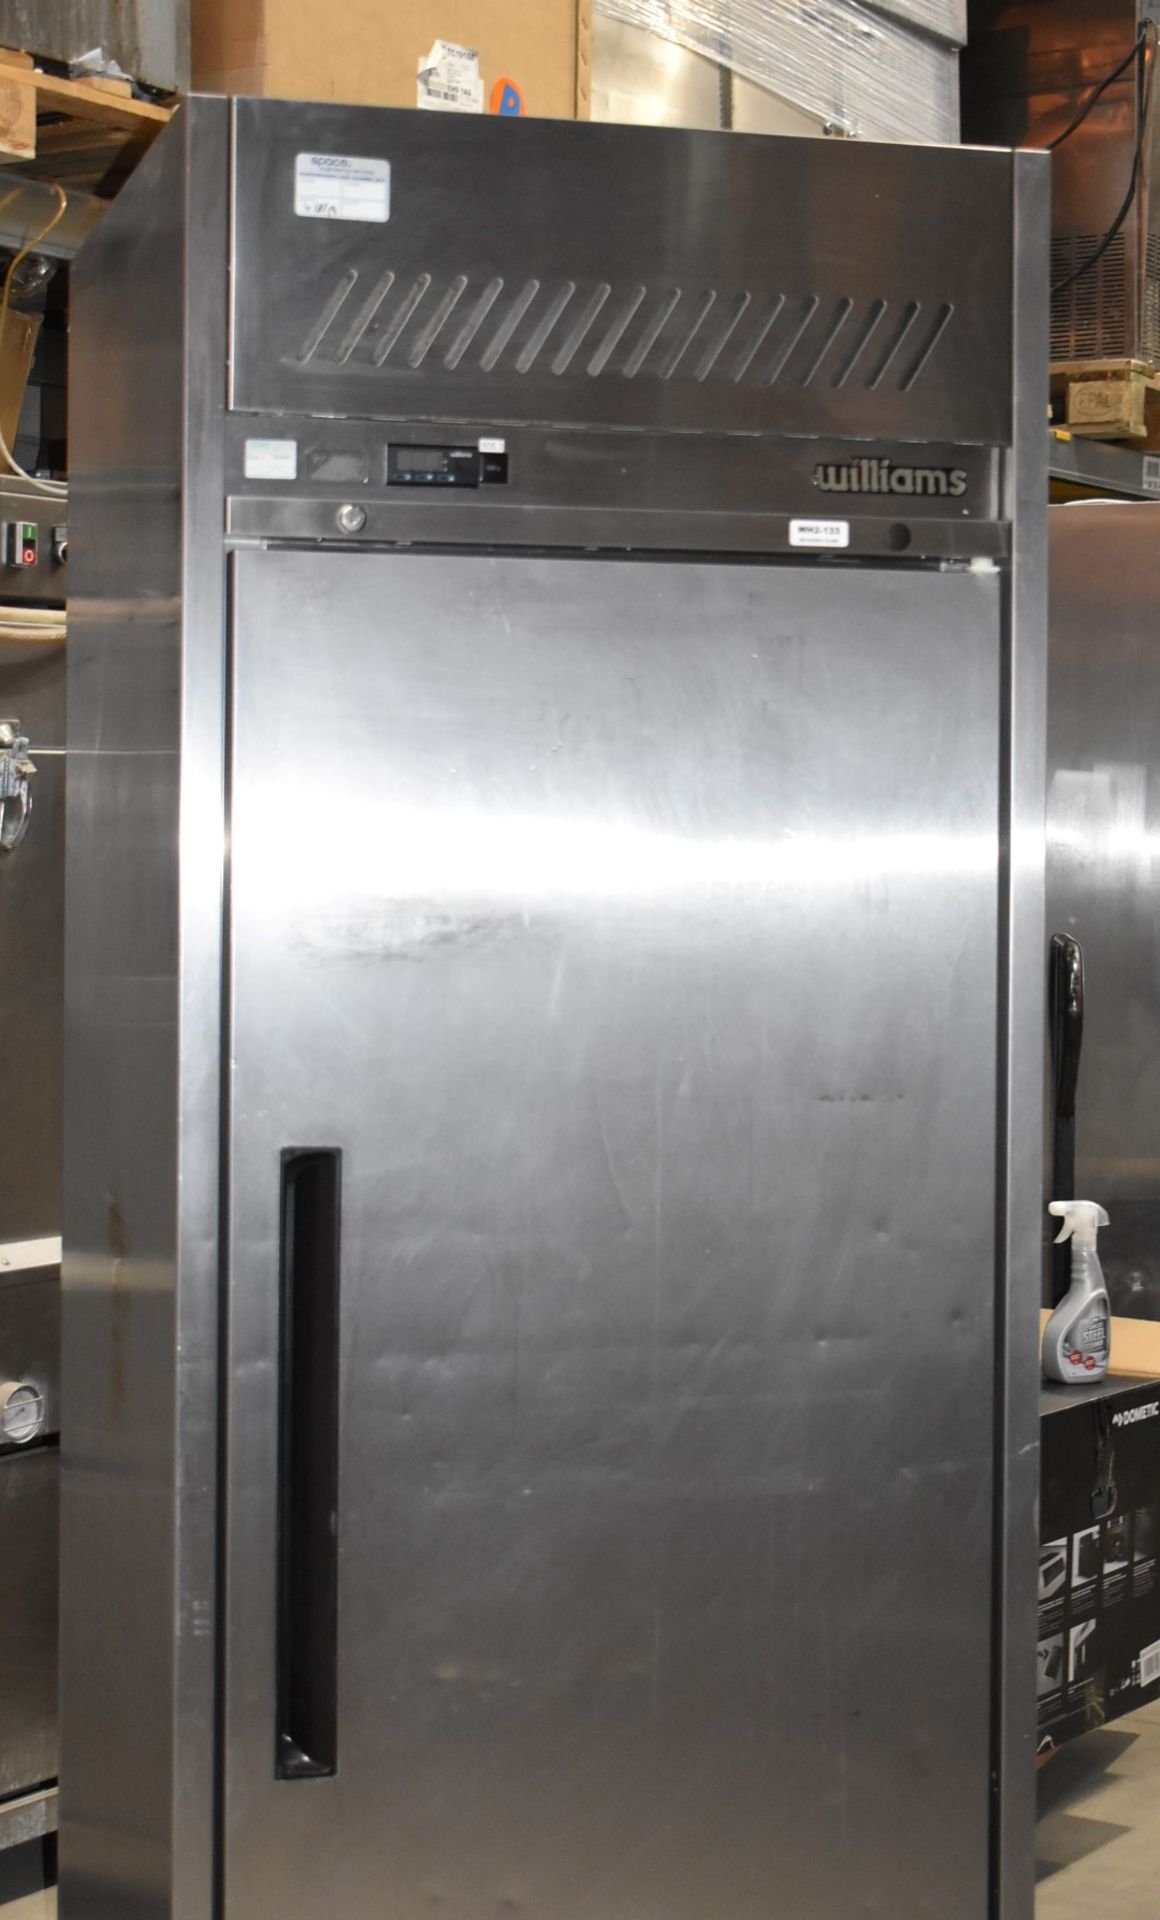 1 x Williams Upright Single Door Refrigerator With Stainless Steel Exterior - Model HJ1SA - Recently - Image 3 of 11